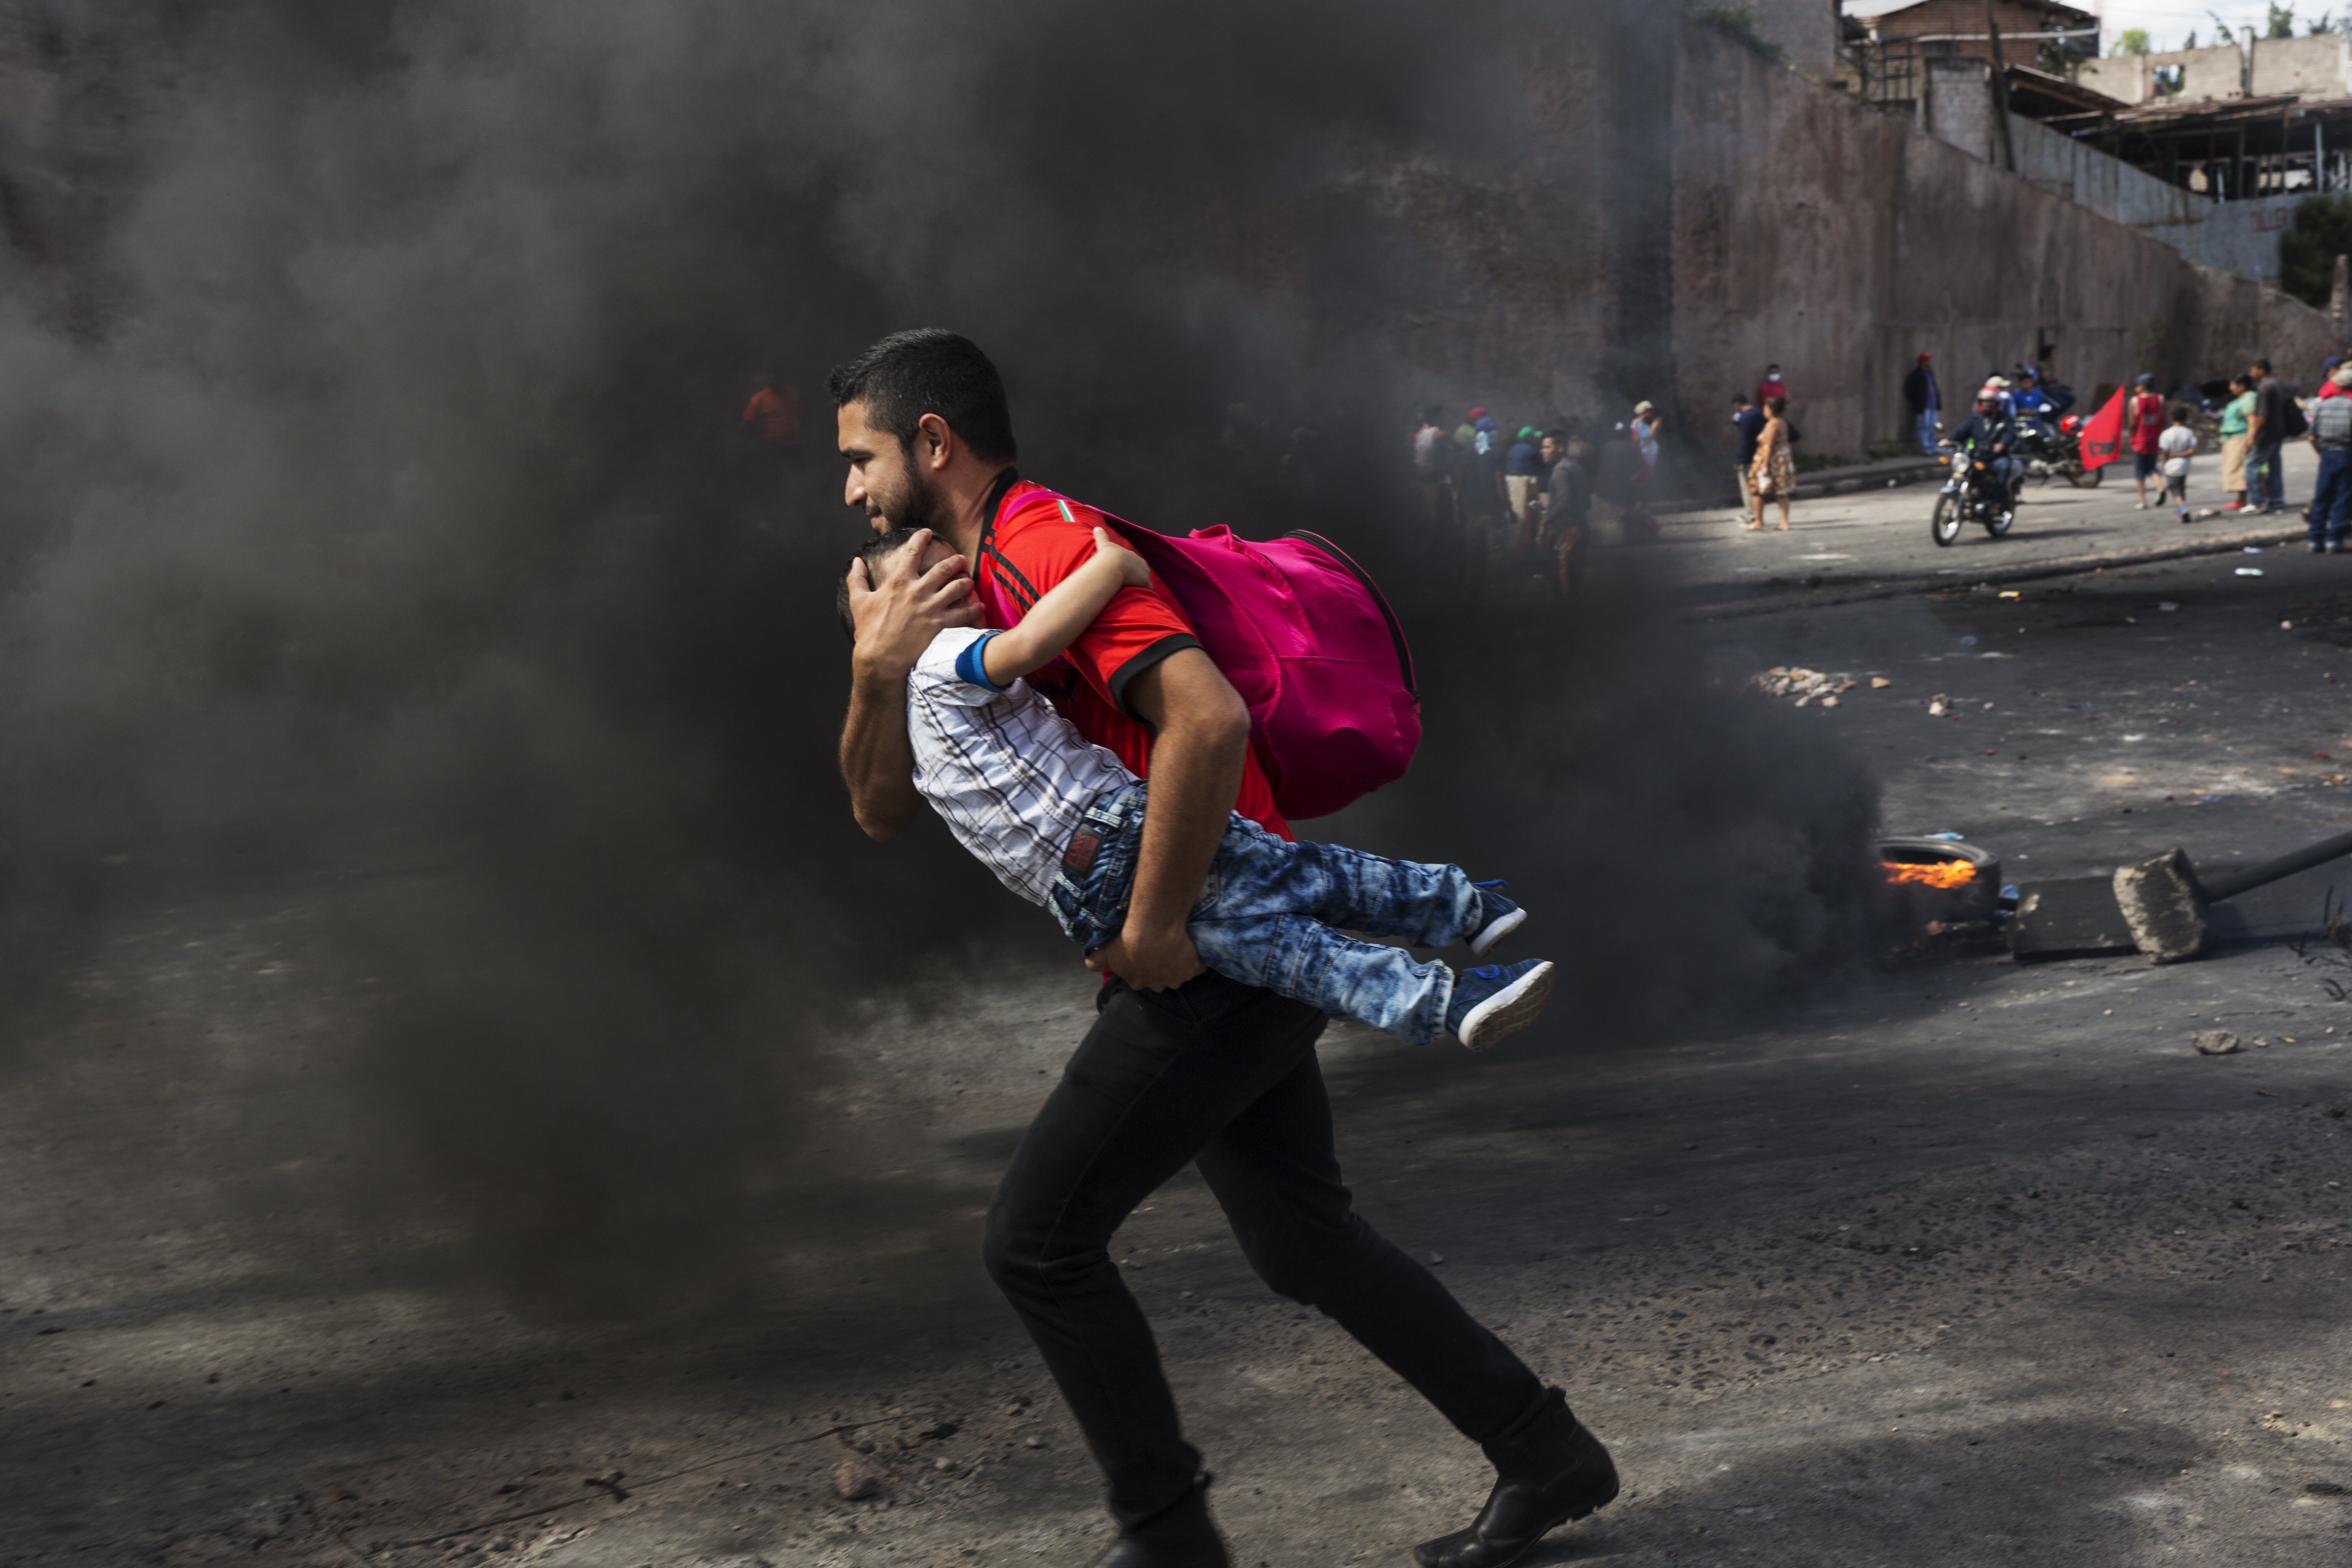 A man carries his son while crossing a burning barricade erected by supporters of presidential candidate Salvador Nasralla protesting official election results that have trickled out giving incumbent President Juan Orlando Hernandez a growing lead, in Tegucigalpa, Honduras, Friday, Dec. 1, 2017. The opposition candidate, who saw his five point lead evaporate, says he will not recognize an official vote count by the country's electoral court and is alleging manipulation of Sunday's election. (AP Photo/Rodrigo Abd)